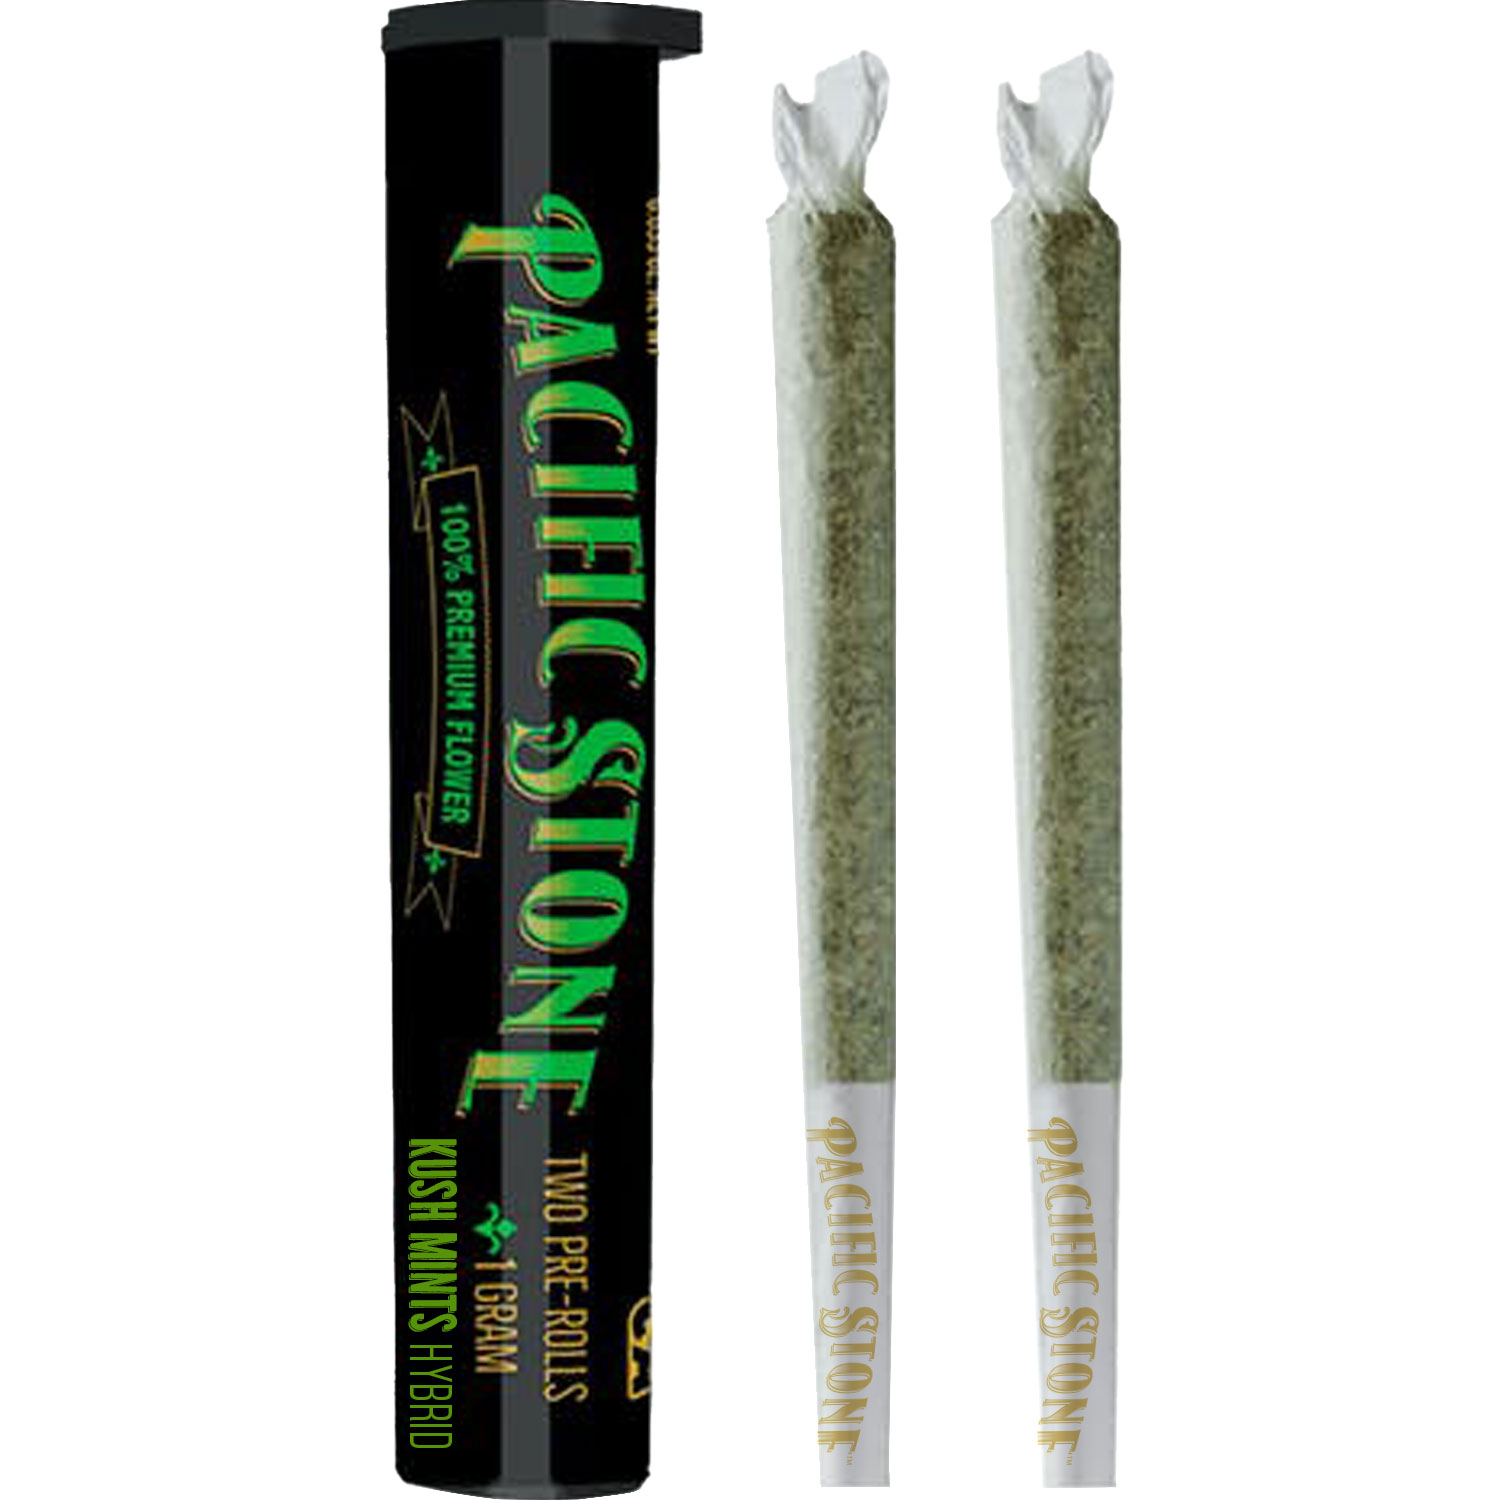 A photograph of Pacific Stone Preroll 0.5g Hybrid Kush Mints 2-Pack 1.0g